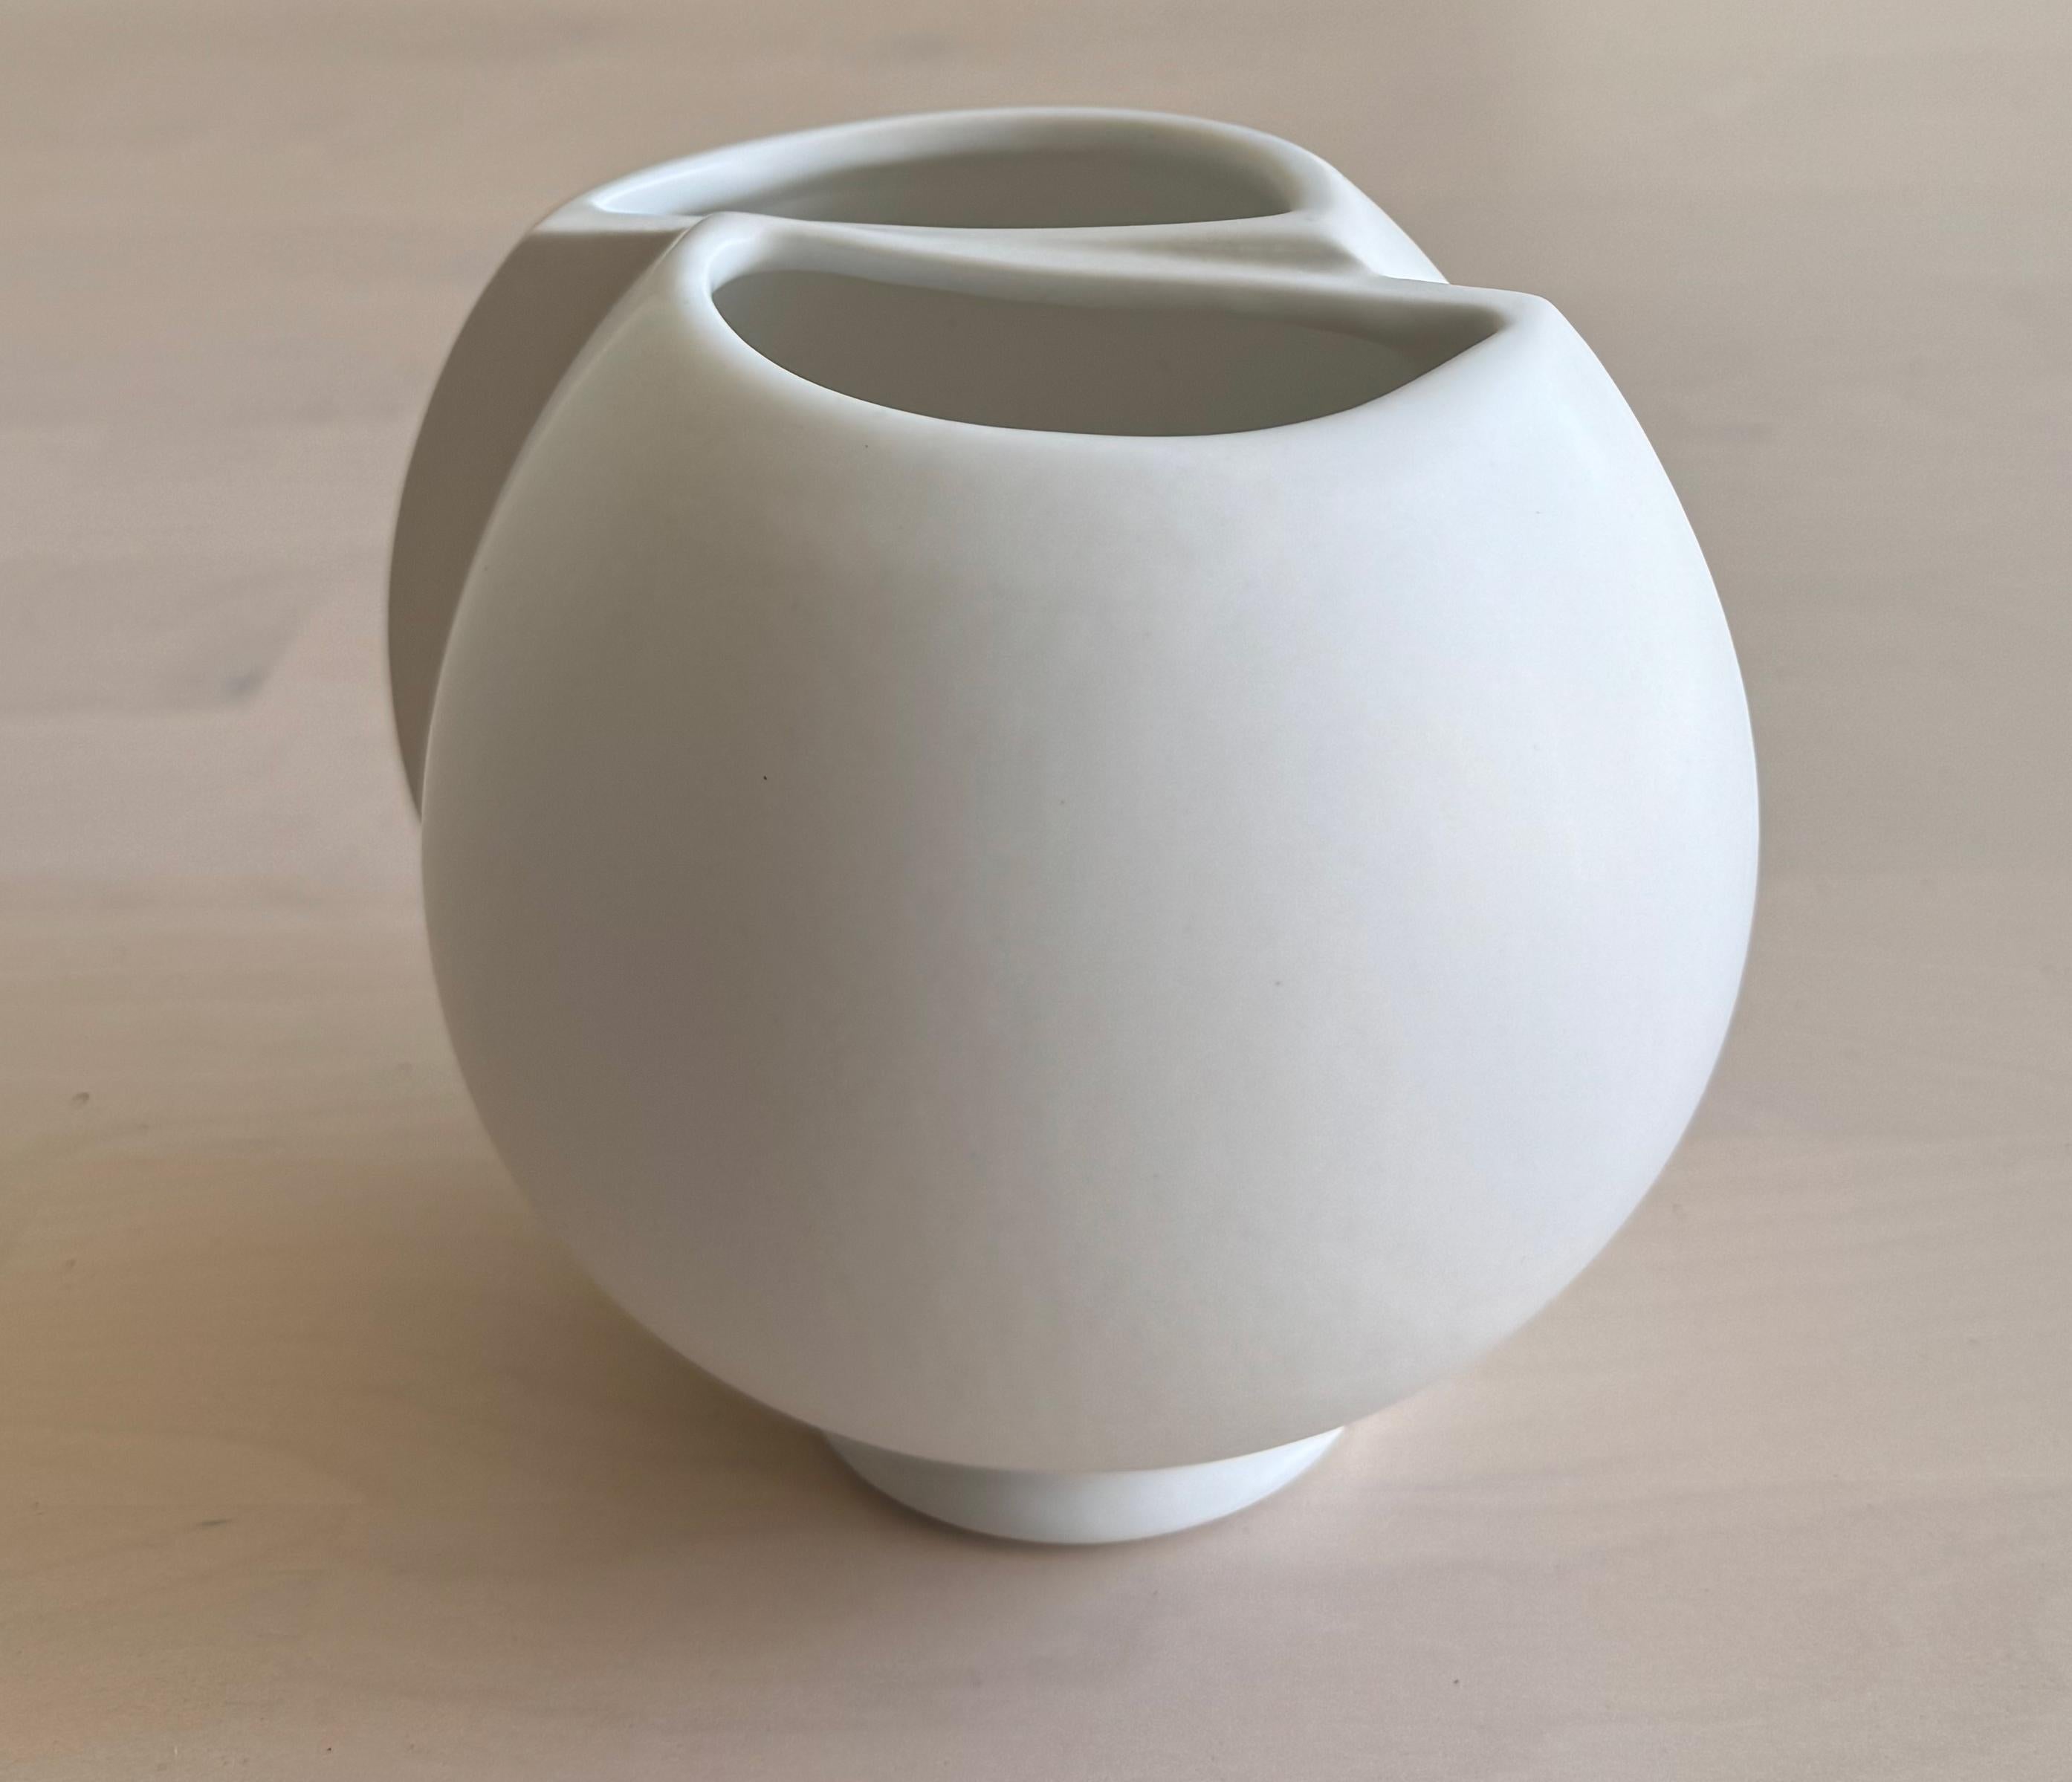 Mid-Centry Modern Wilhelm Kåge Surrea vase with off white Carrara glaze in  a plump, skewed form. The “Surrea” stoneware series was first introduced in 1940, inspired by purism and the work of Le Corbusier. It challenged the aesthetic ideals of the